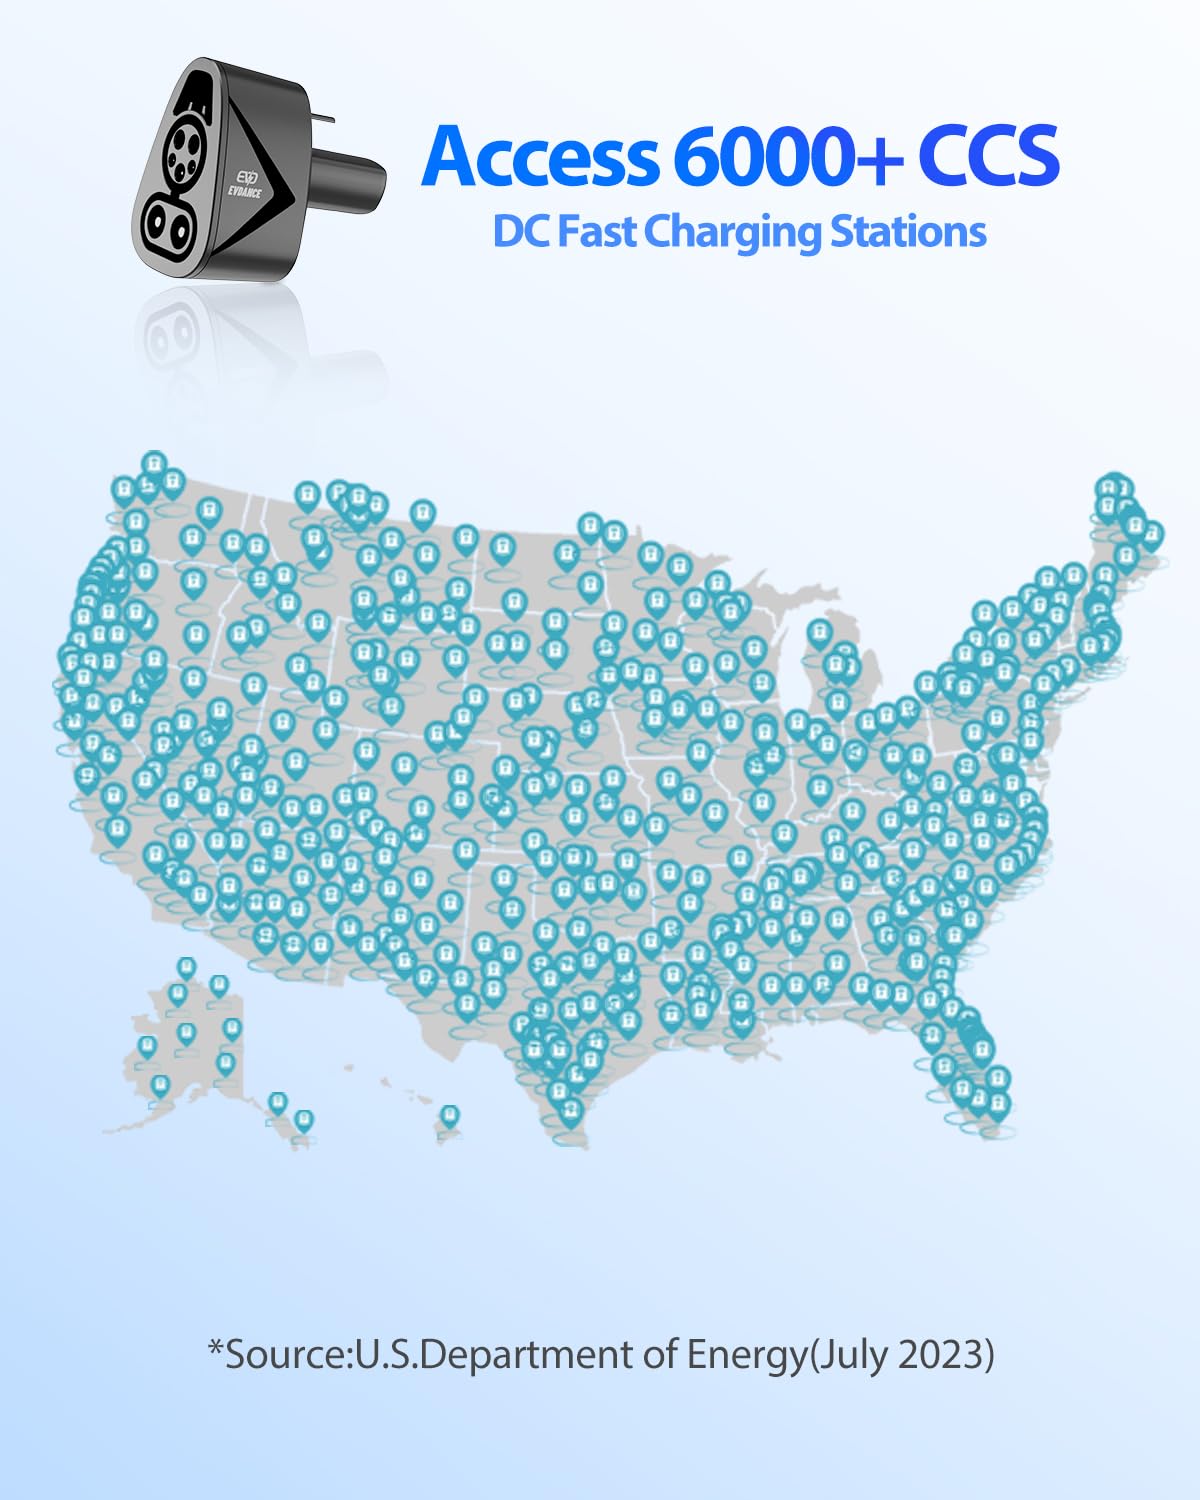 access 6000+css. with Fast DC Charging stations